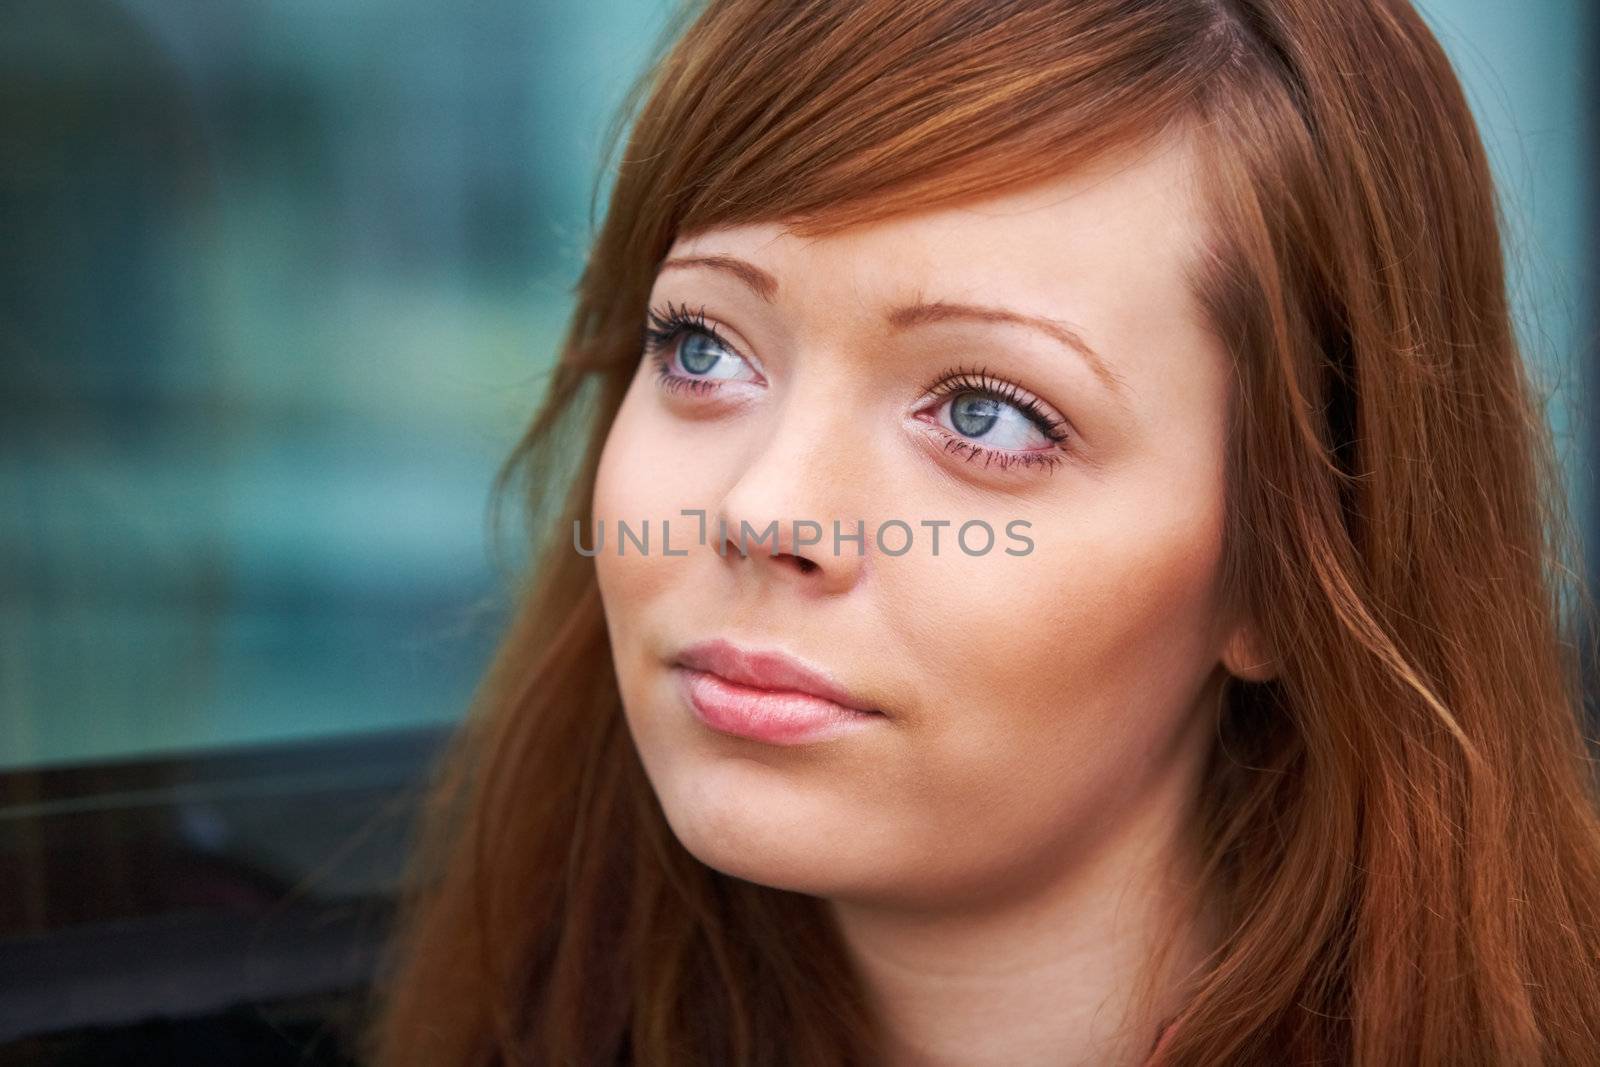 Portrait of teenage girl in outdoor location, close-up